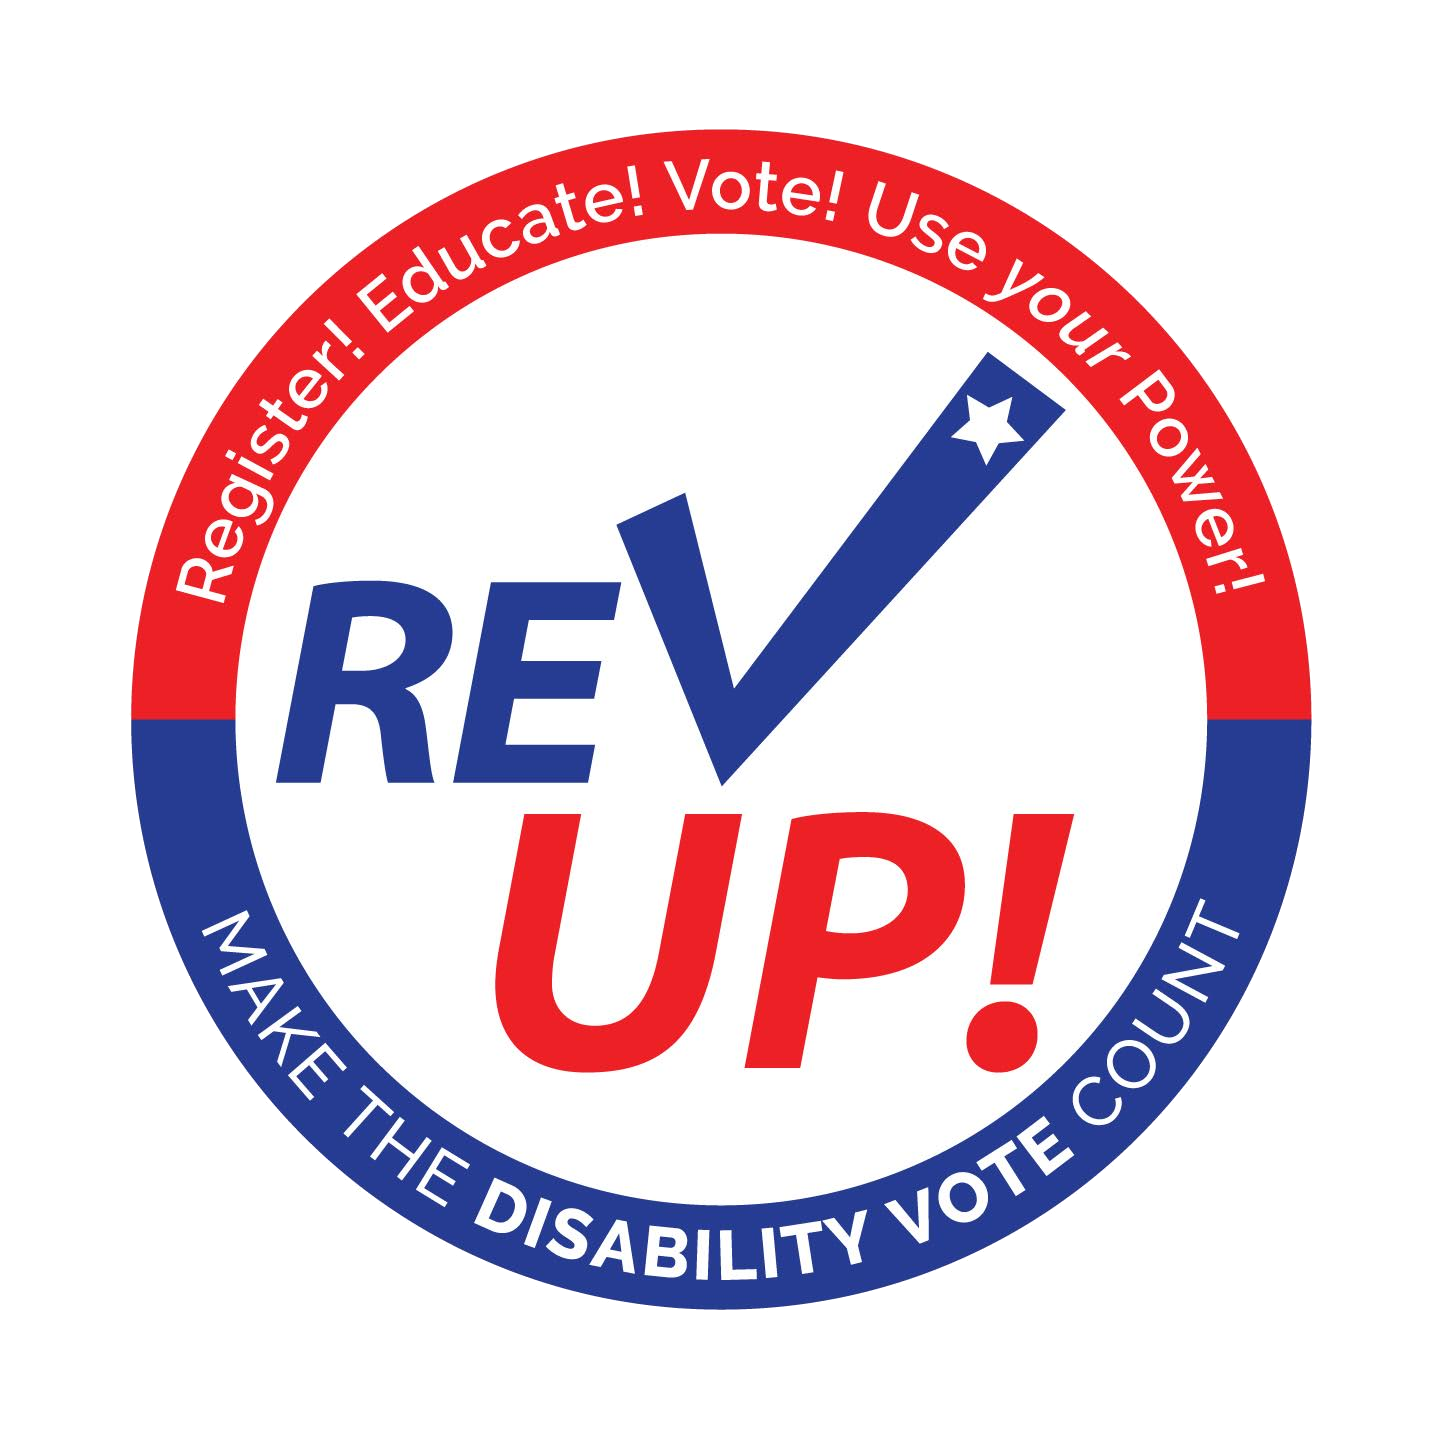 REV UP – Make the Disability Vote Count!